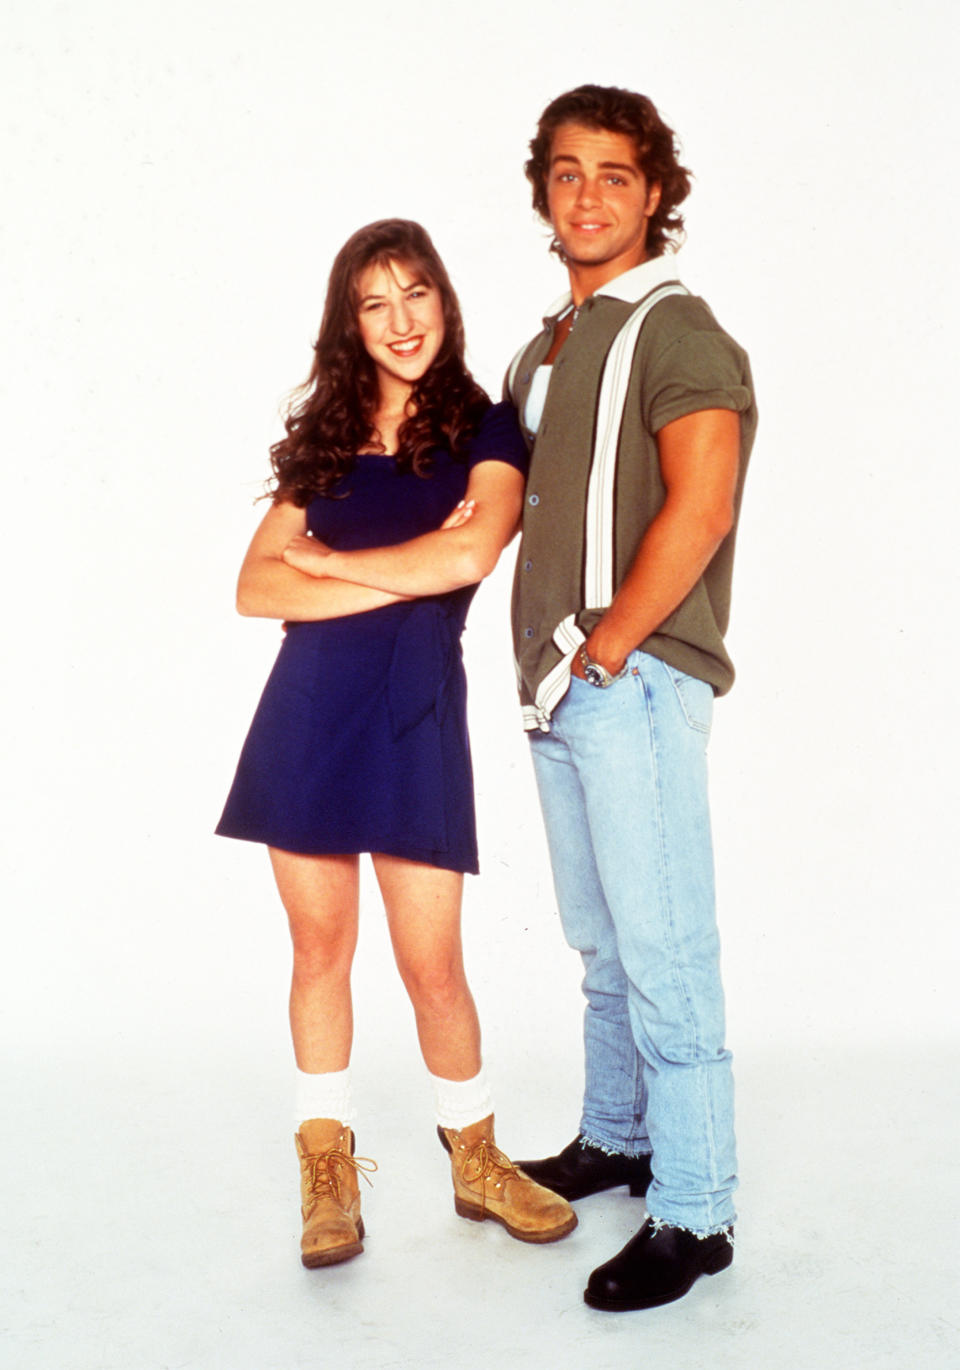 Mayim Bialik and Joey Lawrence in a publicity shot for season 5 of "Blossom." (Photo: Touchstone Pictures via Getty Images)